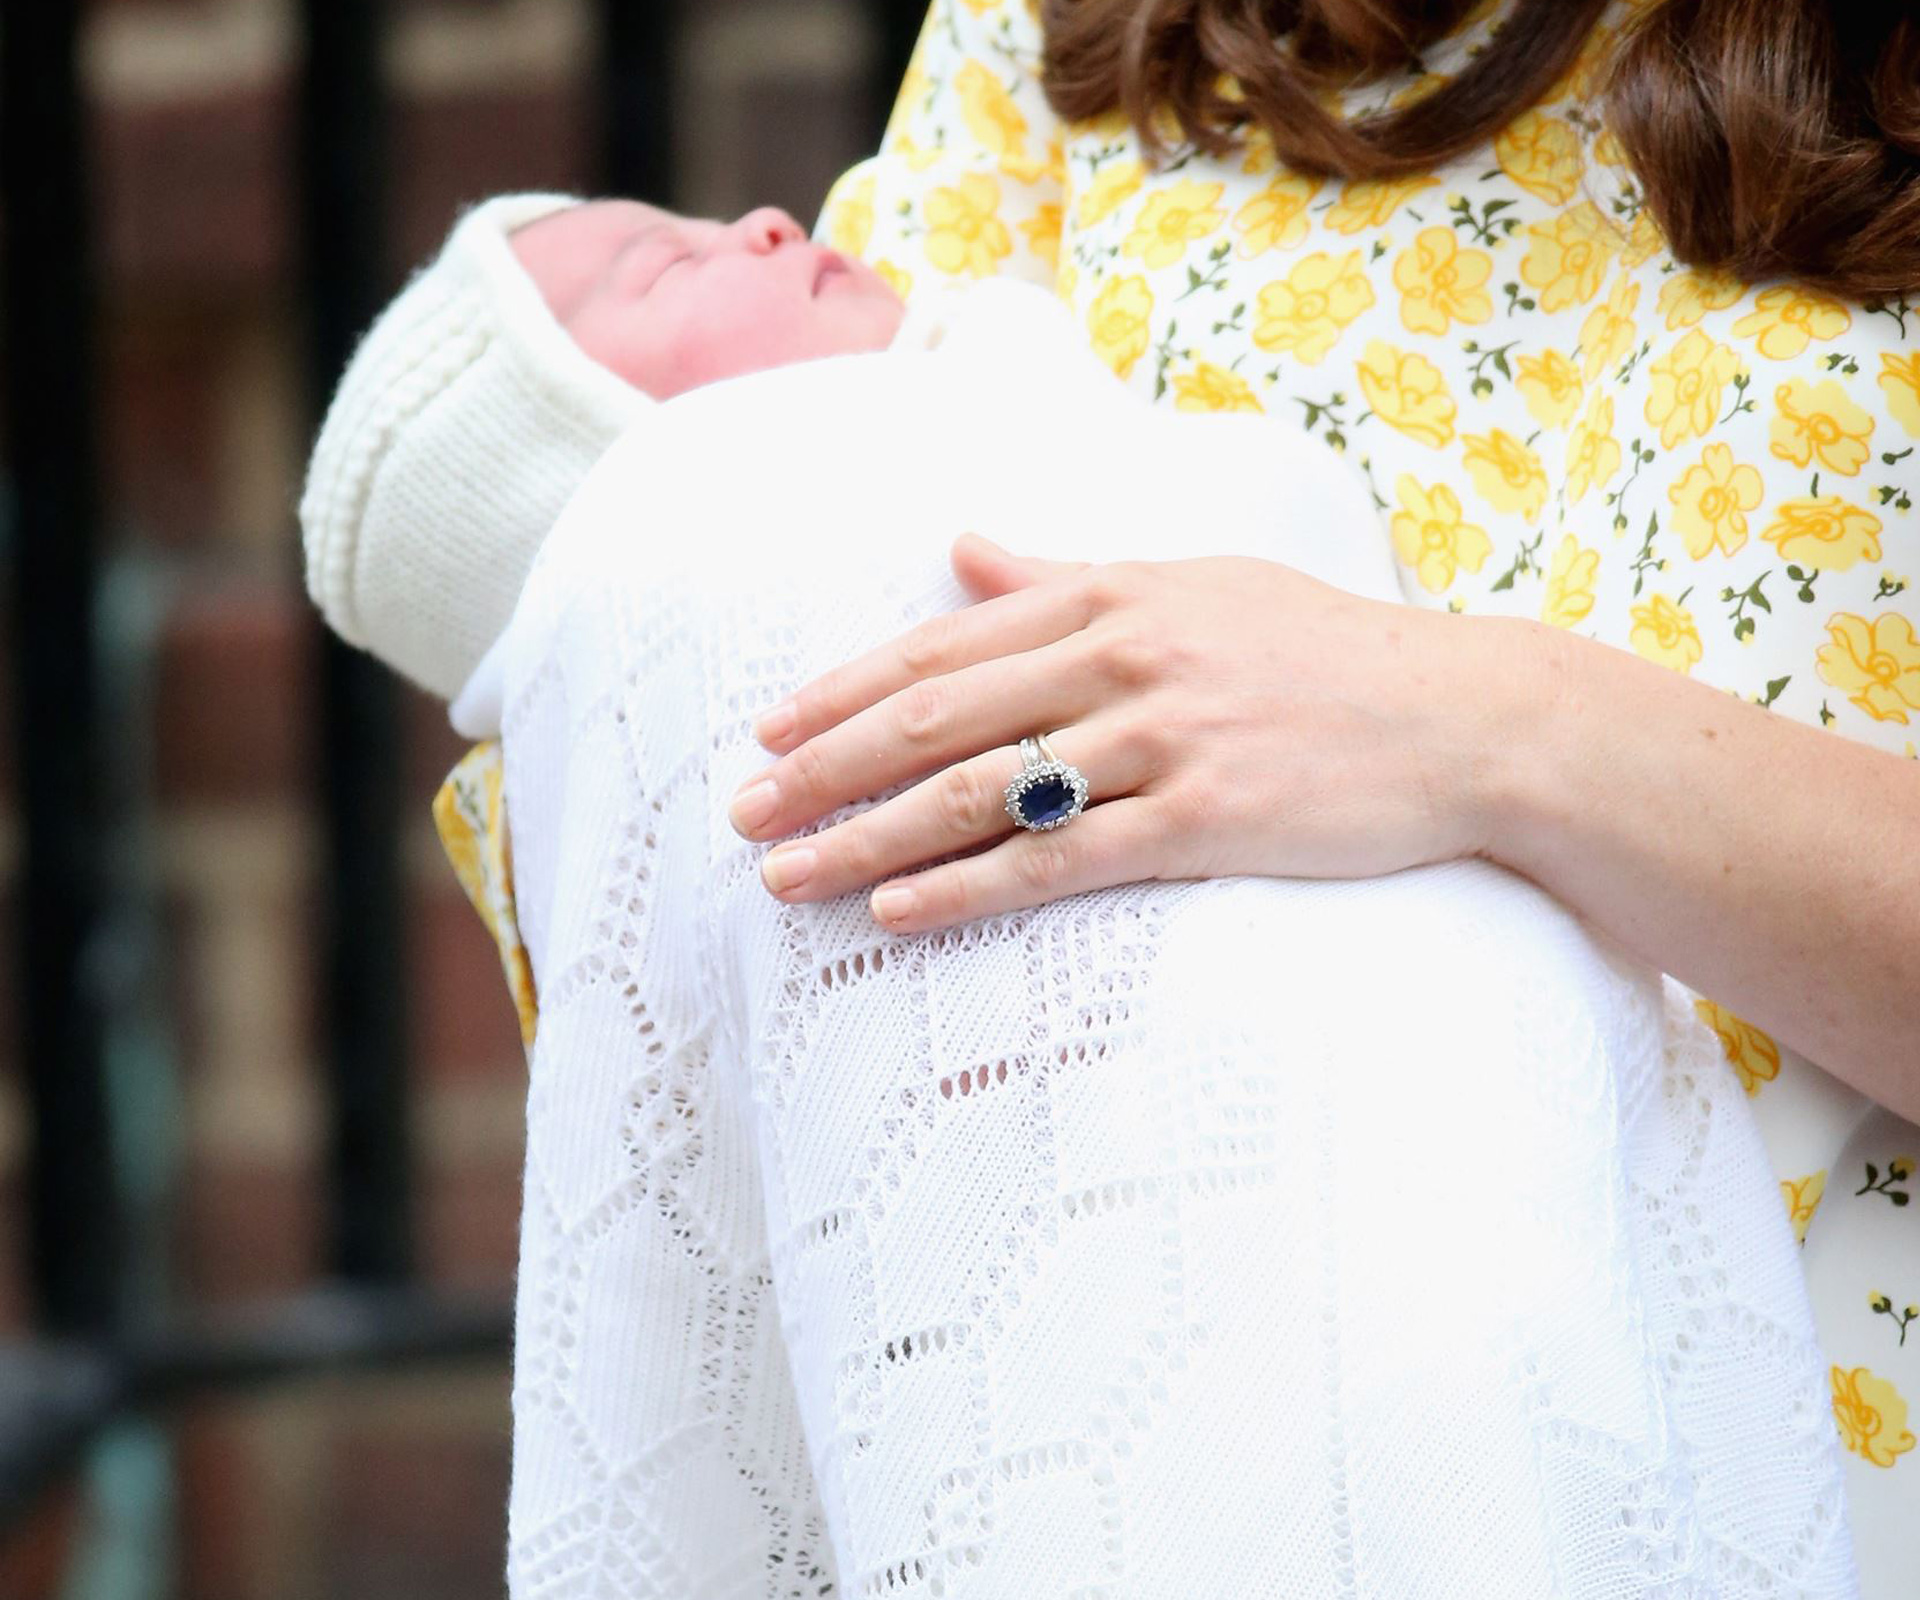 Queen pays first visit to Princess Charlotte